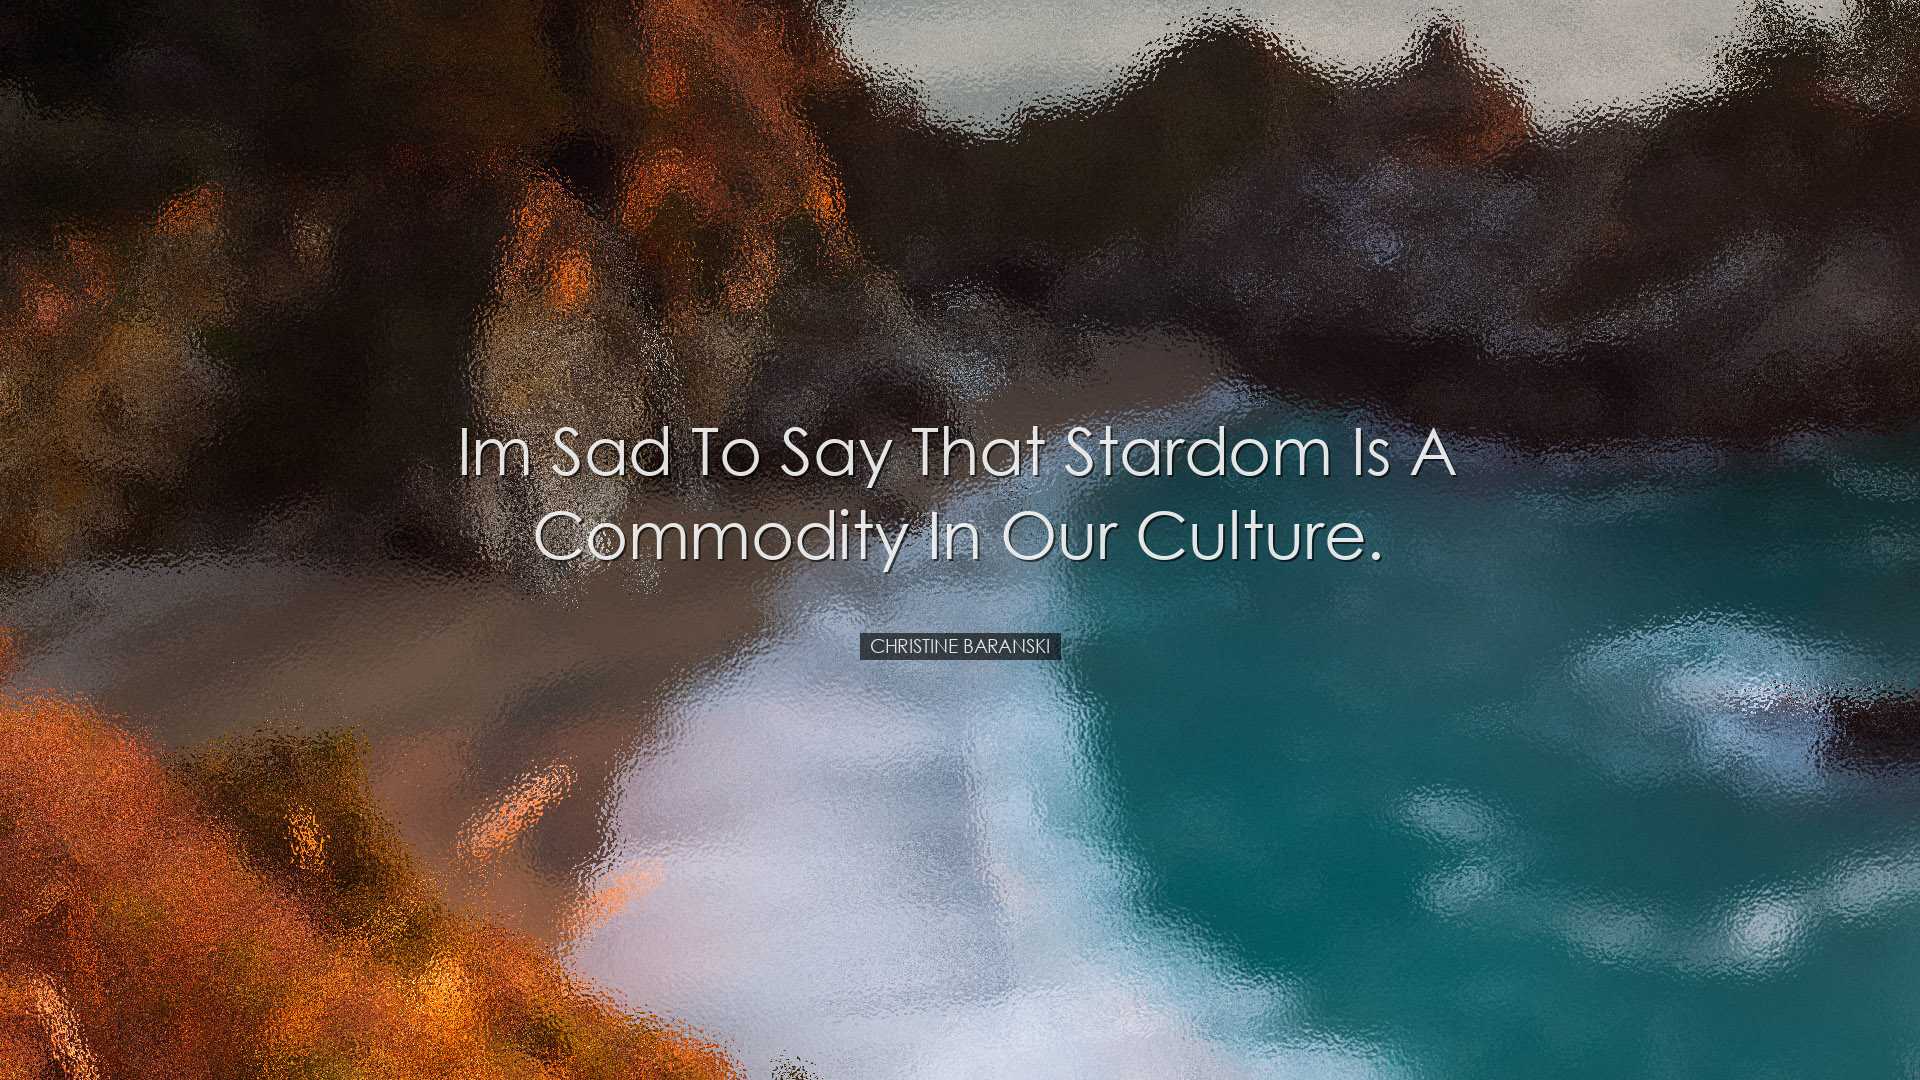 Im sad to say that stardom is a commodity in our culture. - Christ